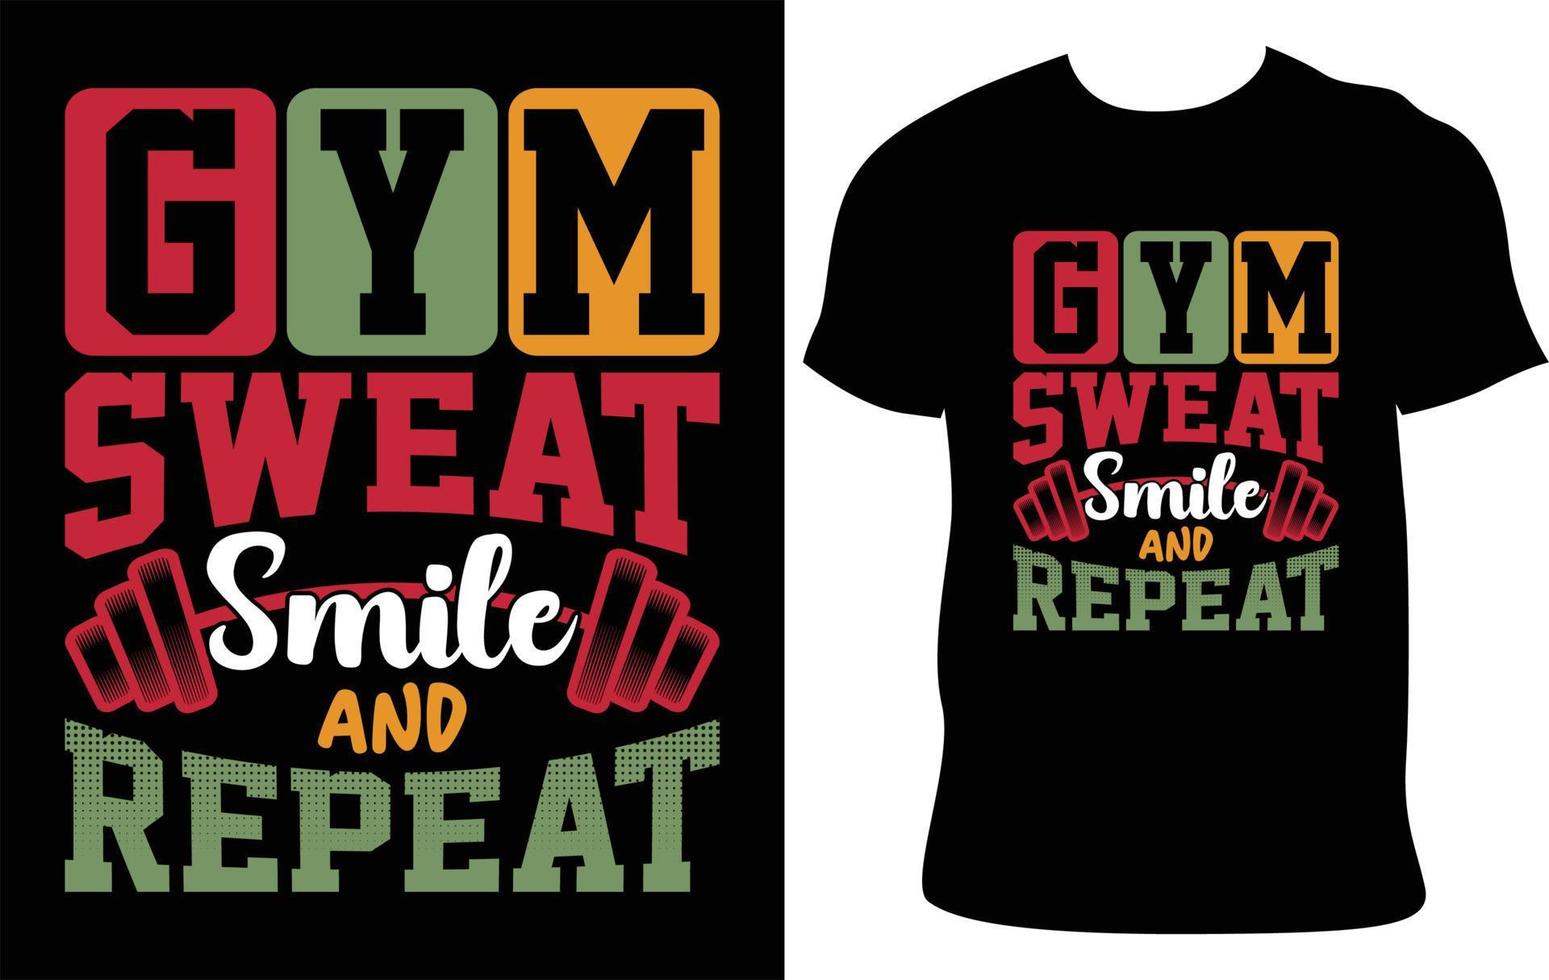 Gym Sweat, Smile And Repeat. Gym Custom Typography T-Shirt Design.  Best Fitness T Shirt Design. Fitness Typography T-Shirt Design. Gym T-Shirt Idea. Best Selling T-Shirt Design. vector